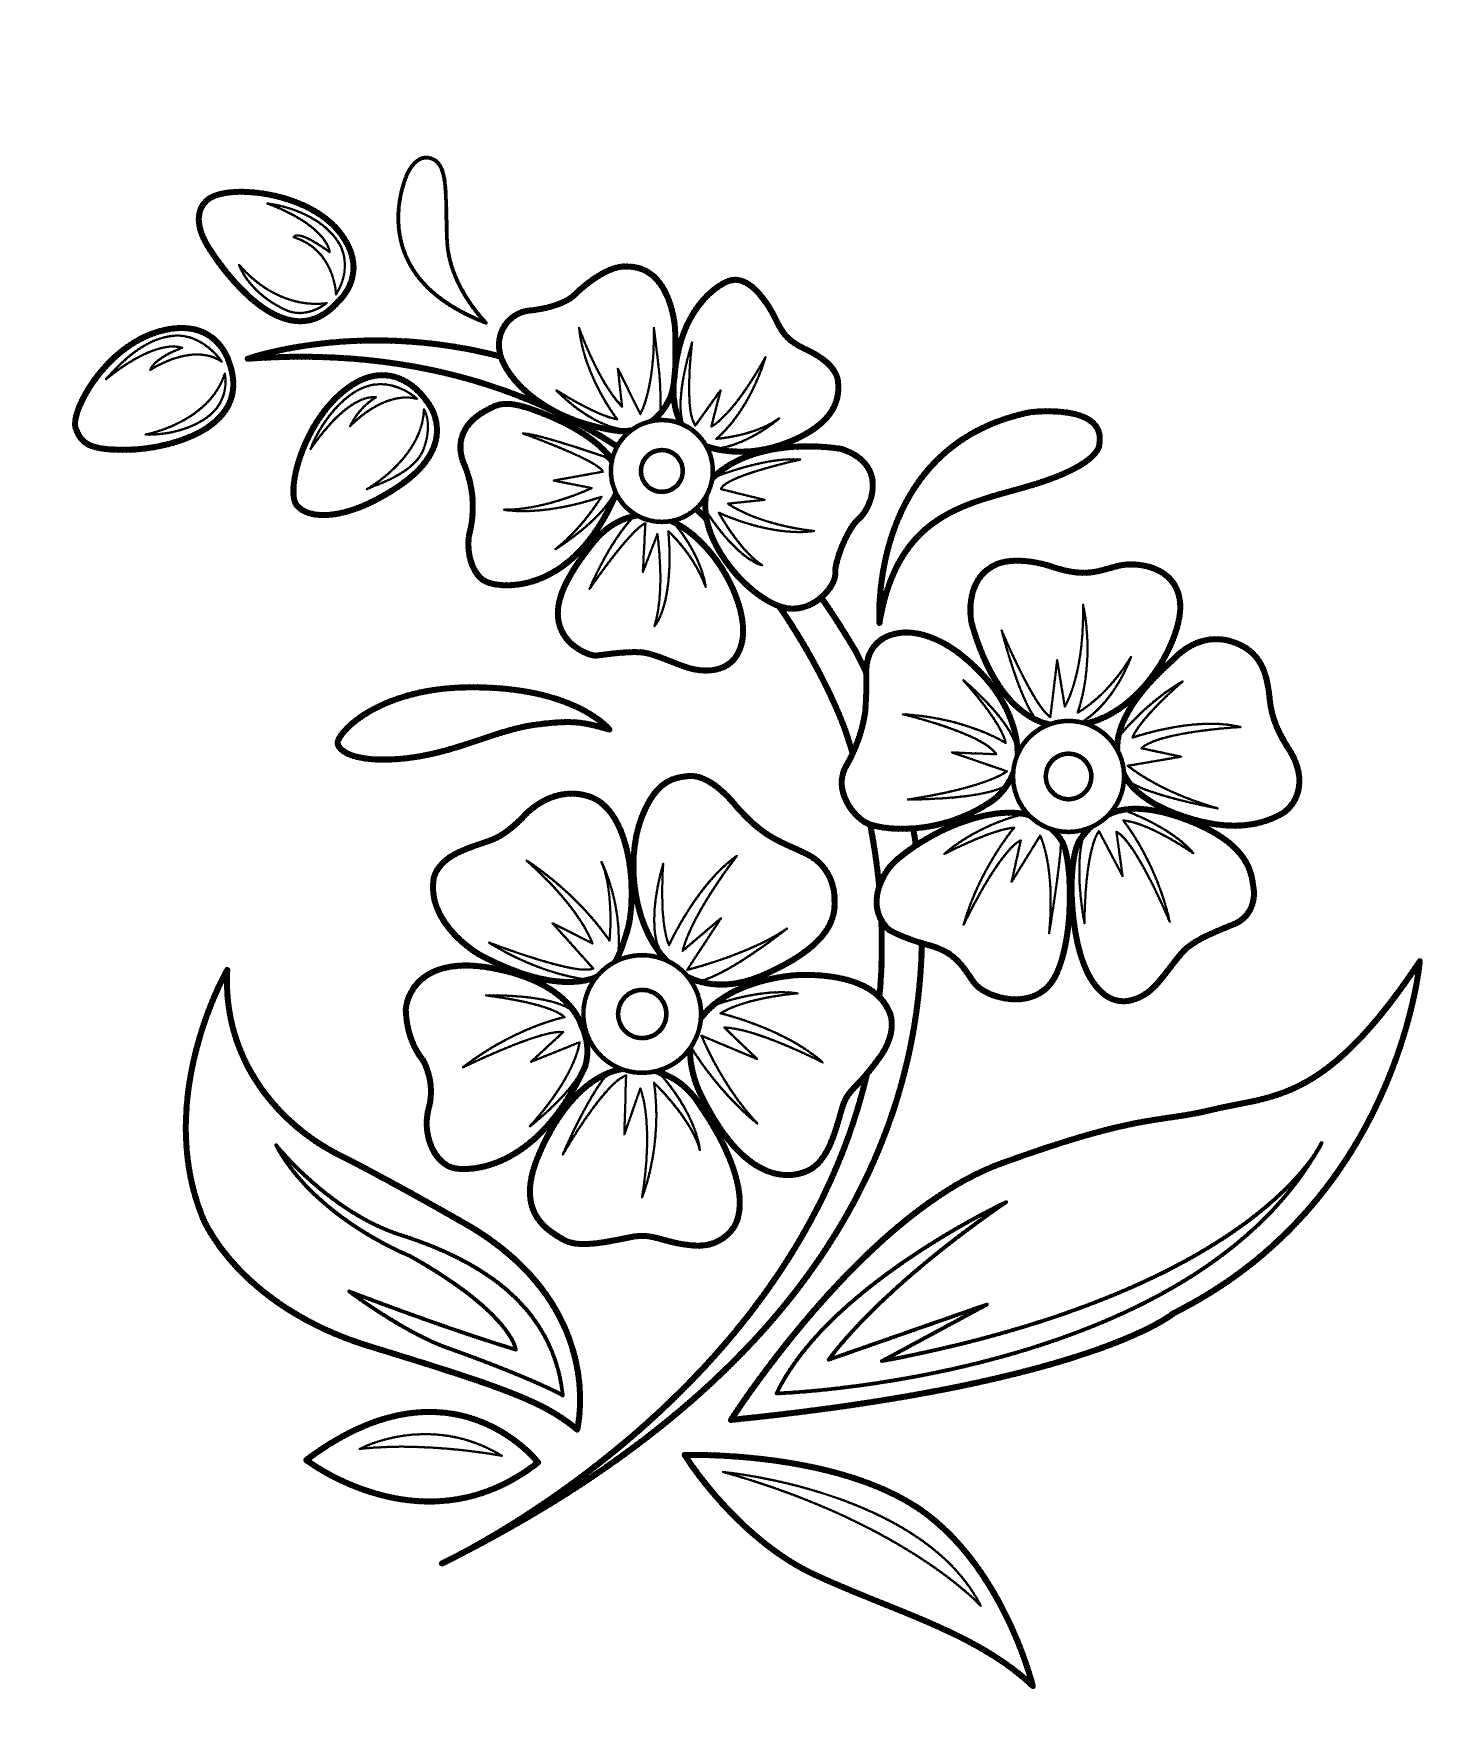 Cute kids coloring pages, easy pansy flower drawing, pansy flower black and  white illustration, pansy flower outline, pansy flower vector art, simple  flower drawing. Stock Vector | Adobe Stock